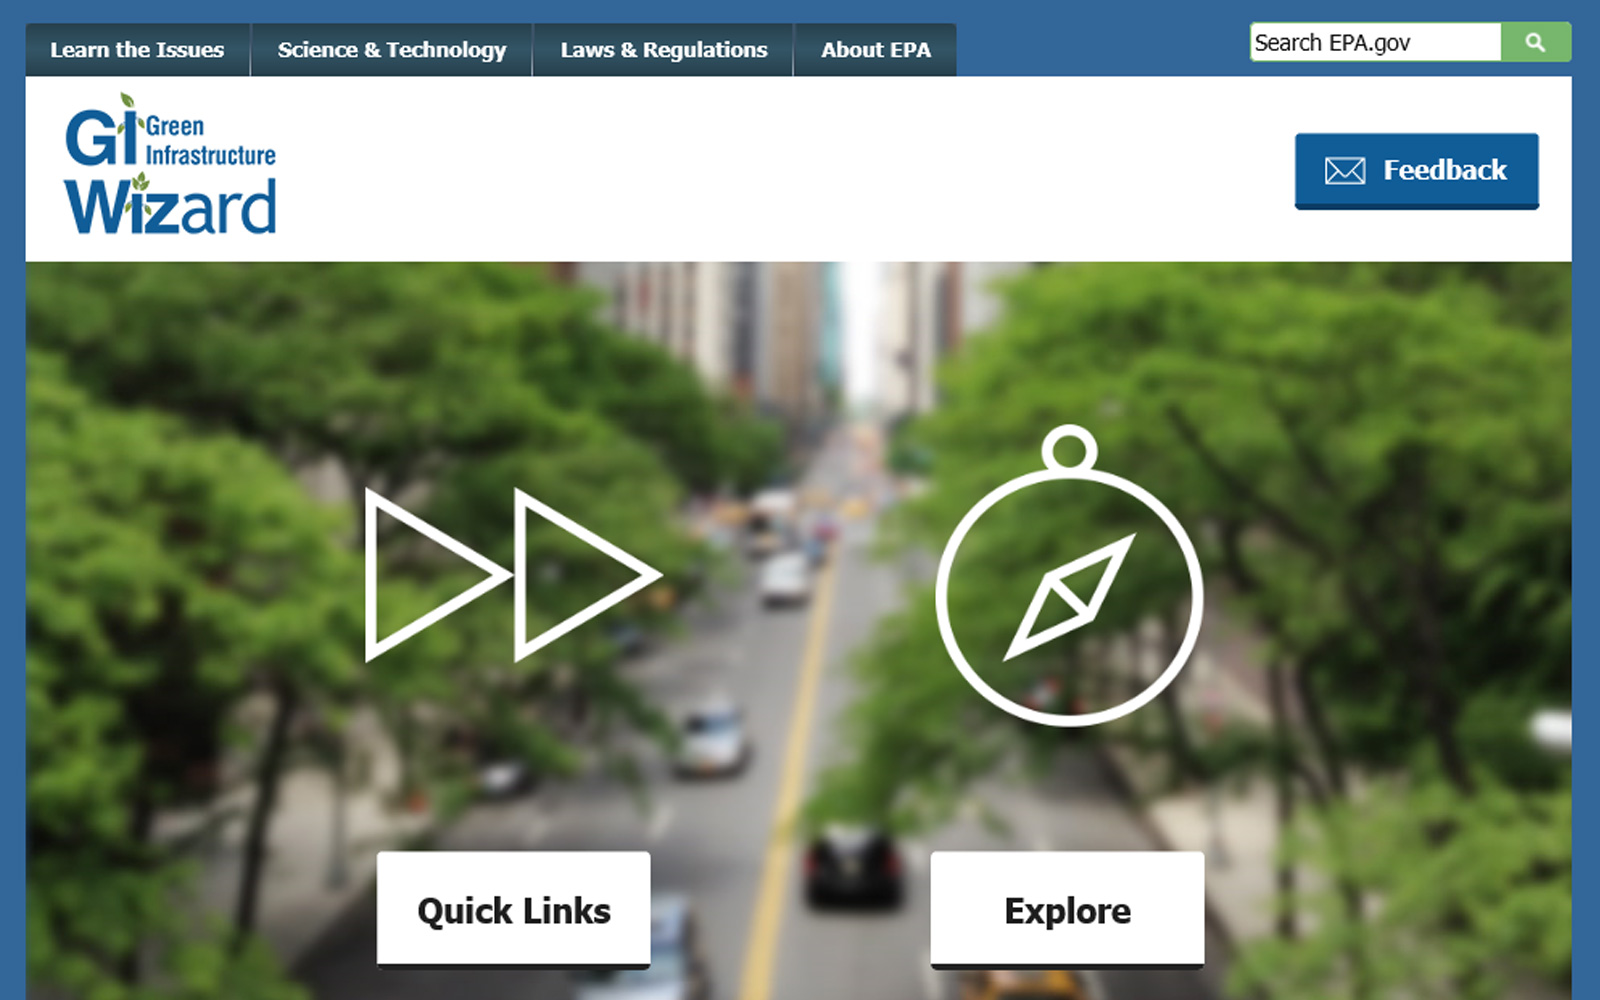 Screenshot of EPA's Green Infrastructure Wizard home page showing its "Quick Links" and "Explore" icons